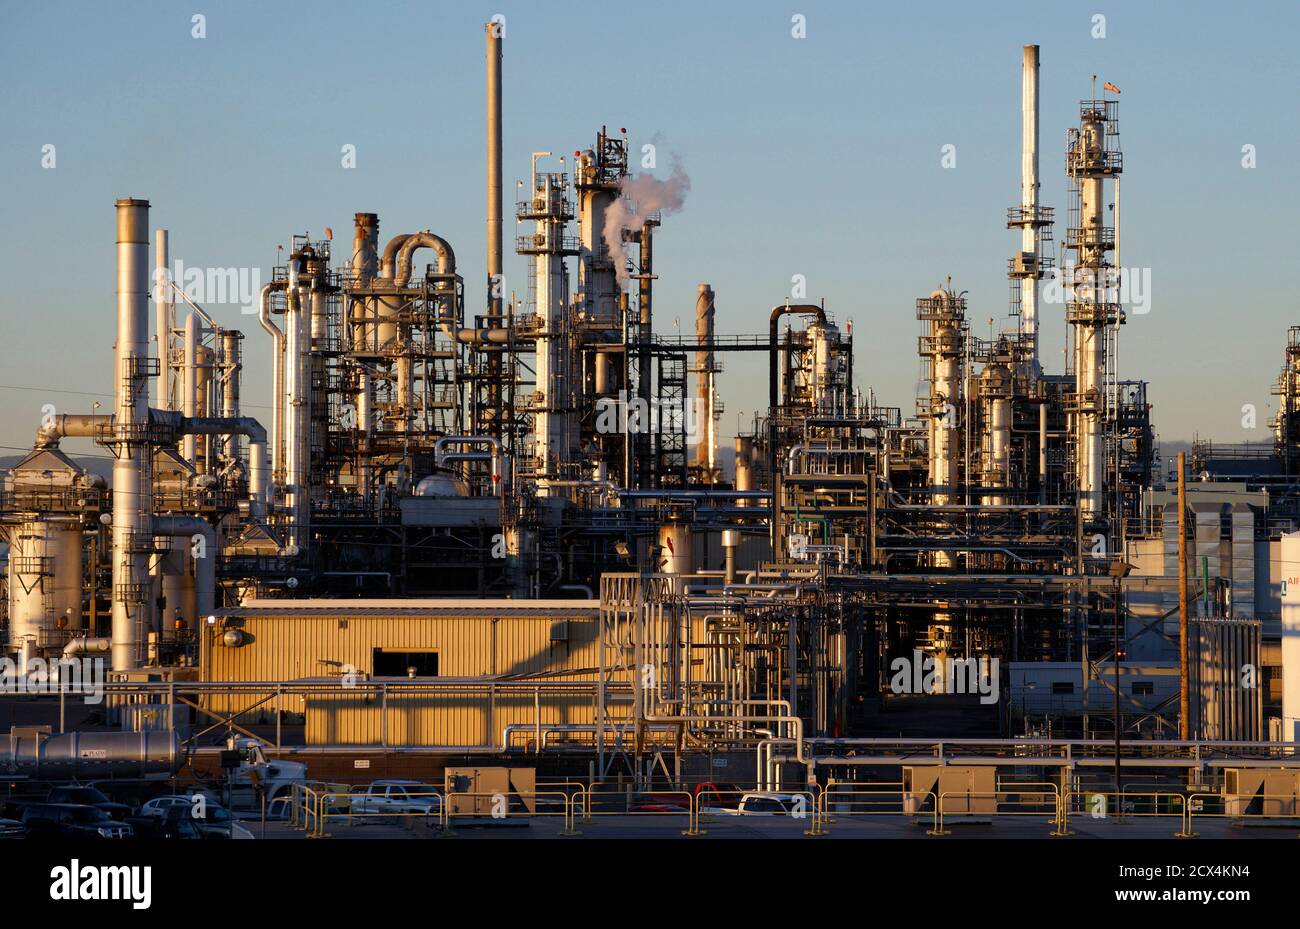 An oil refinery is seen at sunrise in Denver October 14, 2014. Brent crude fell almost 3 percent to a fresh low near $86 a barrel on Tuesday, trading at its weakest level since 2010 after the West's energy watchdog cut its estimates for oil demand this year and next. REUTERS/Rick Wilking (UNITED STATES - Tags: BUSINESS ENERGY) Stock Photo